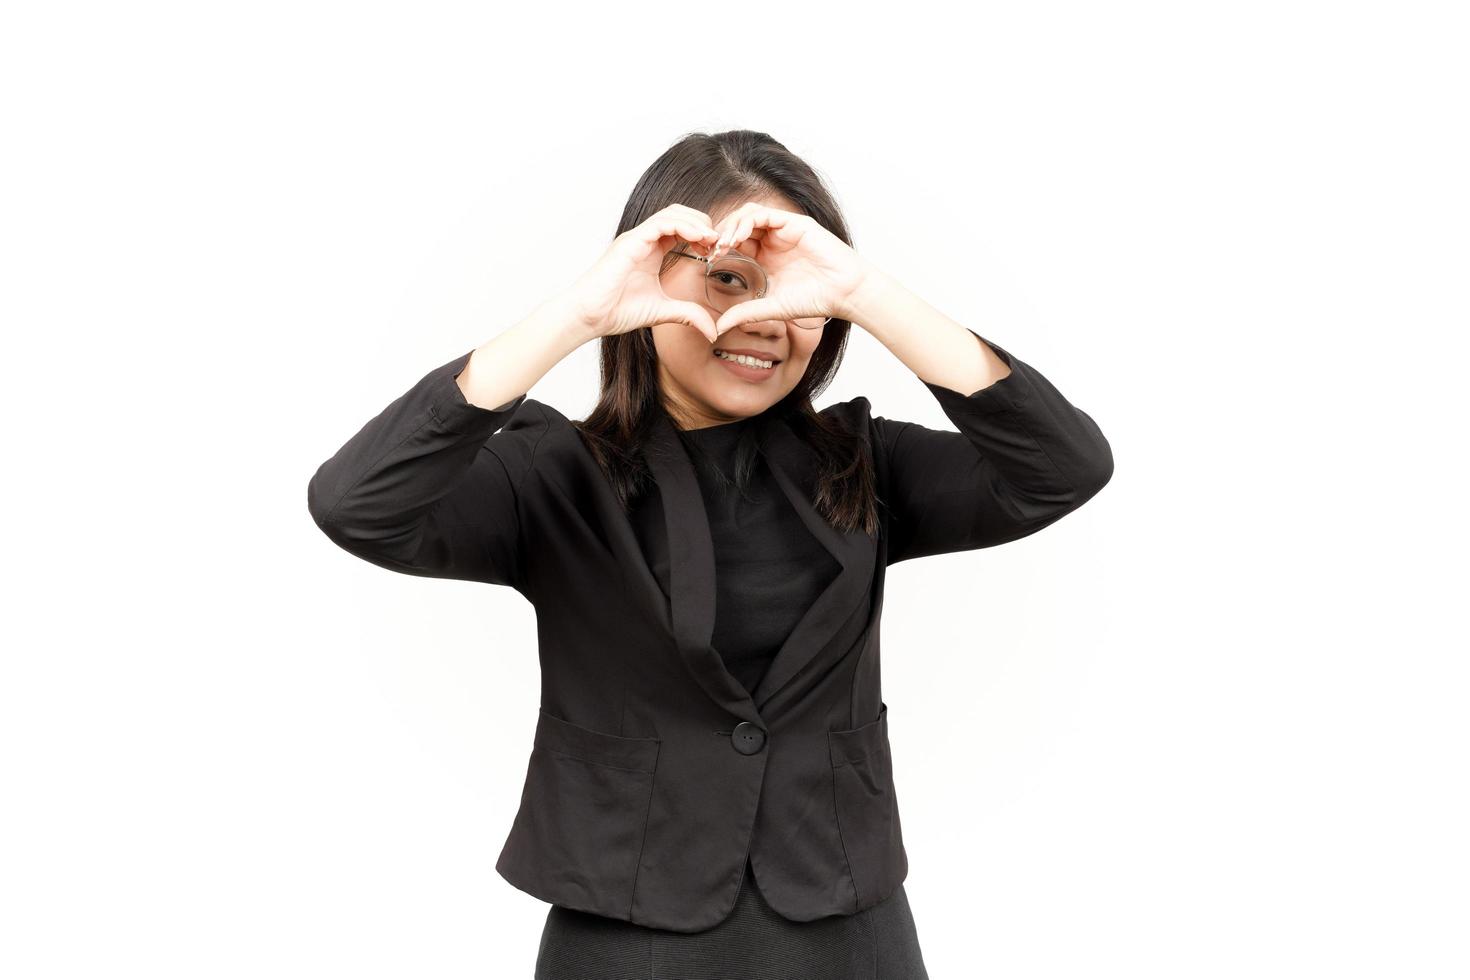 Showing Love Sign Of Beautiful Asian Woman Wearing Black Blazer Isolated On White Background photo